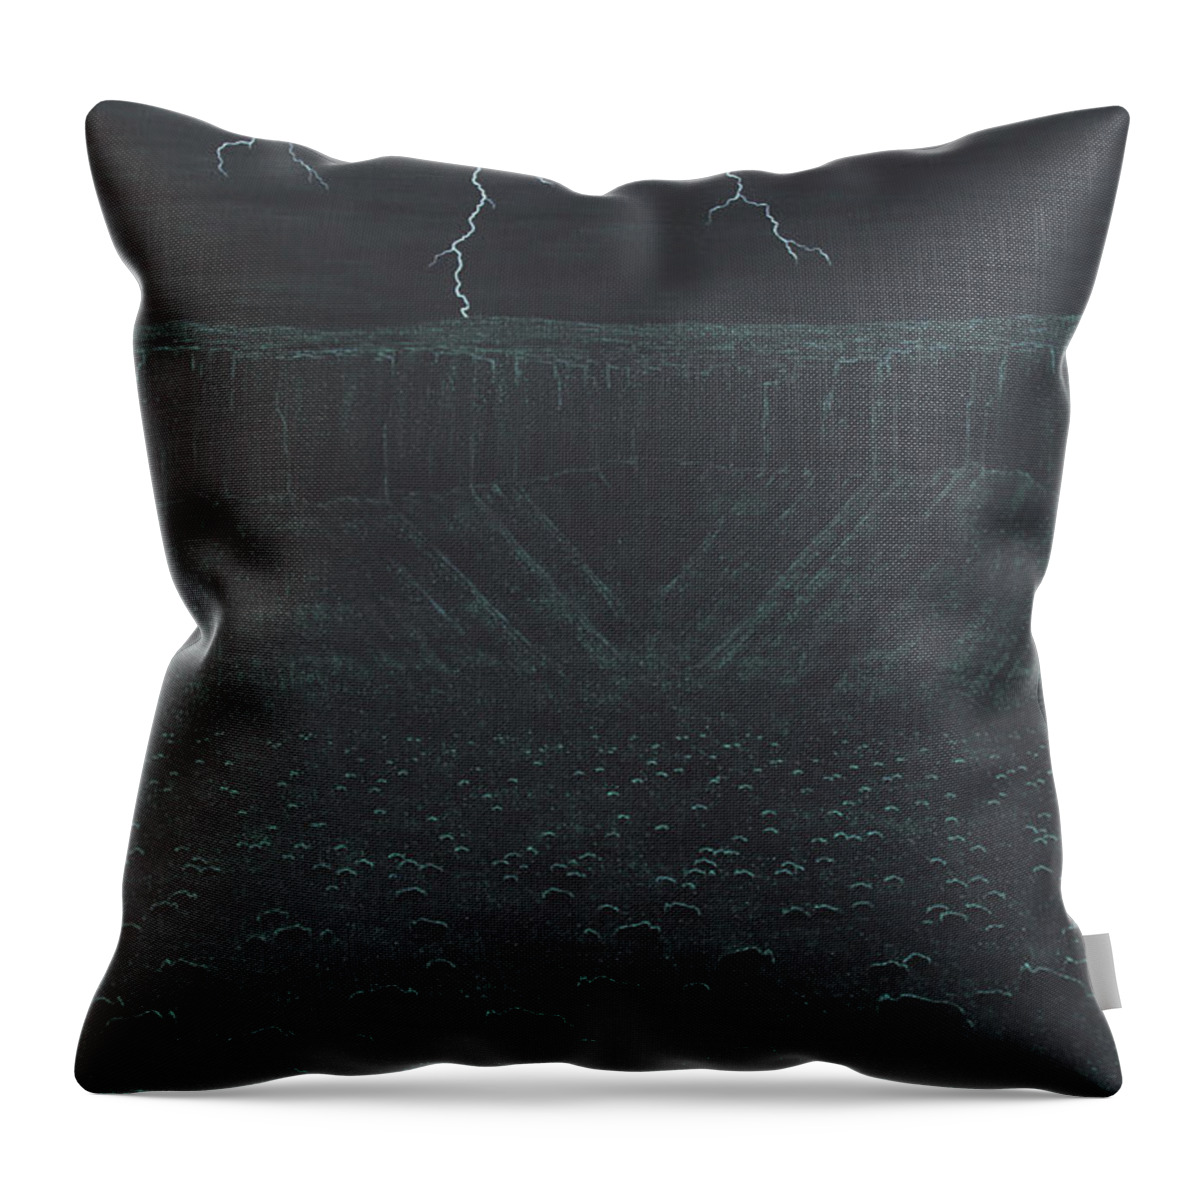 Doug Miller Throw Pillow featuring the painting Thunder Visions by Doug Miller